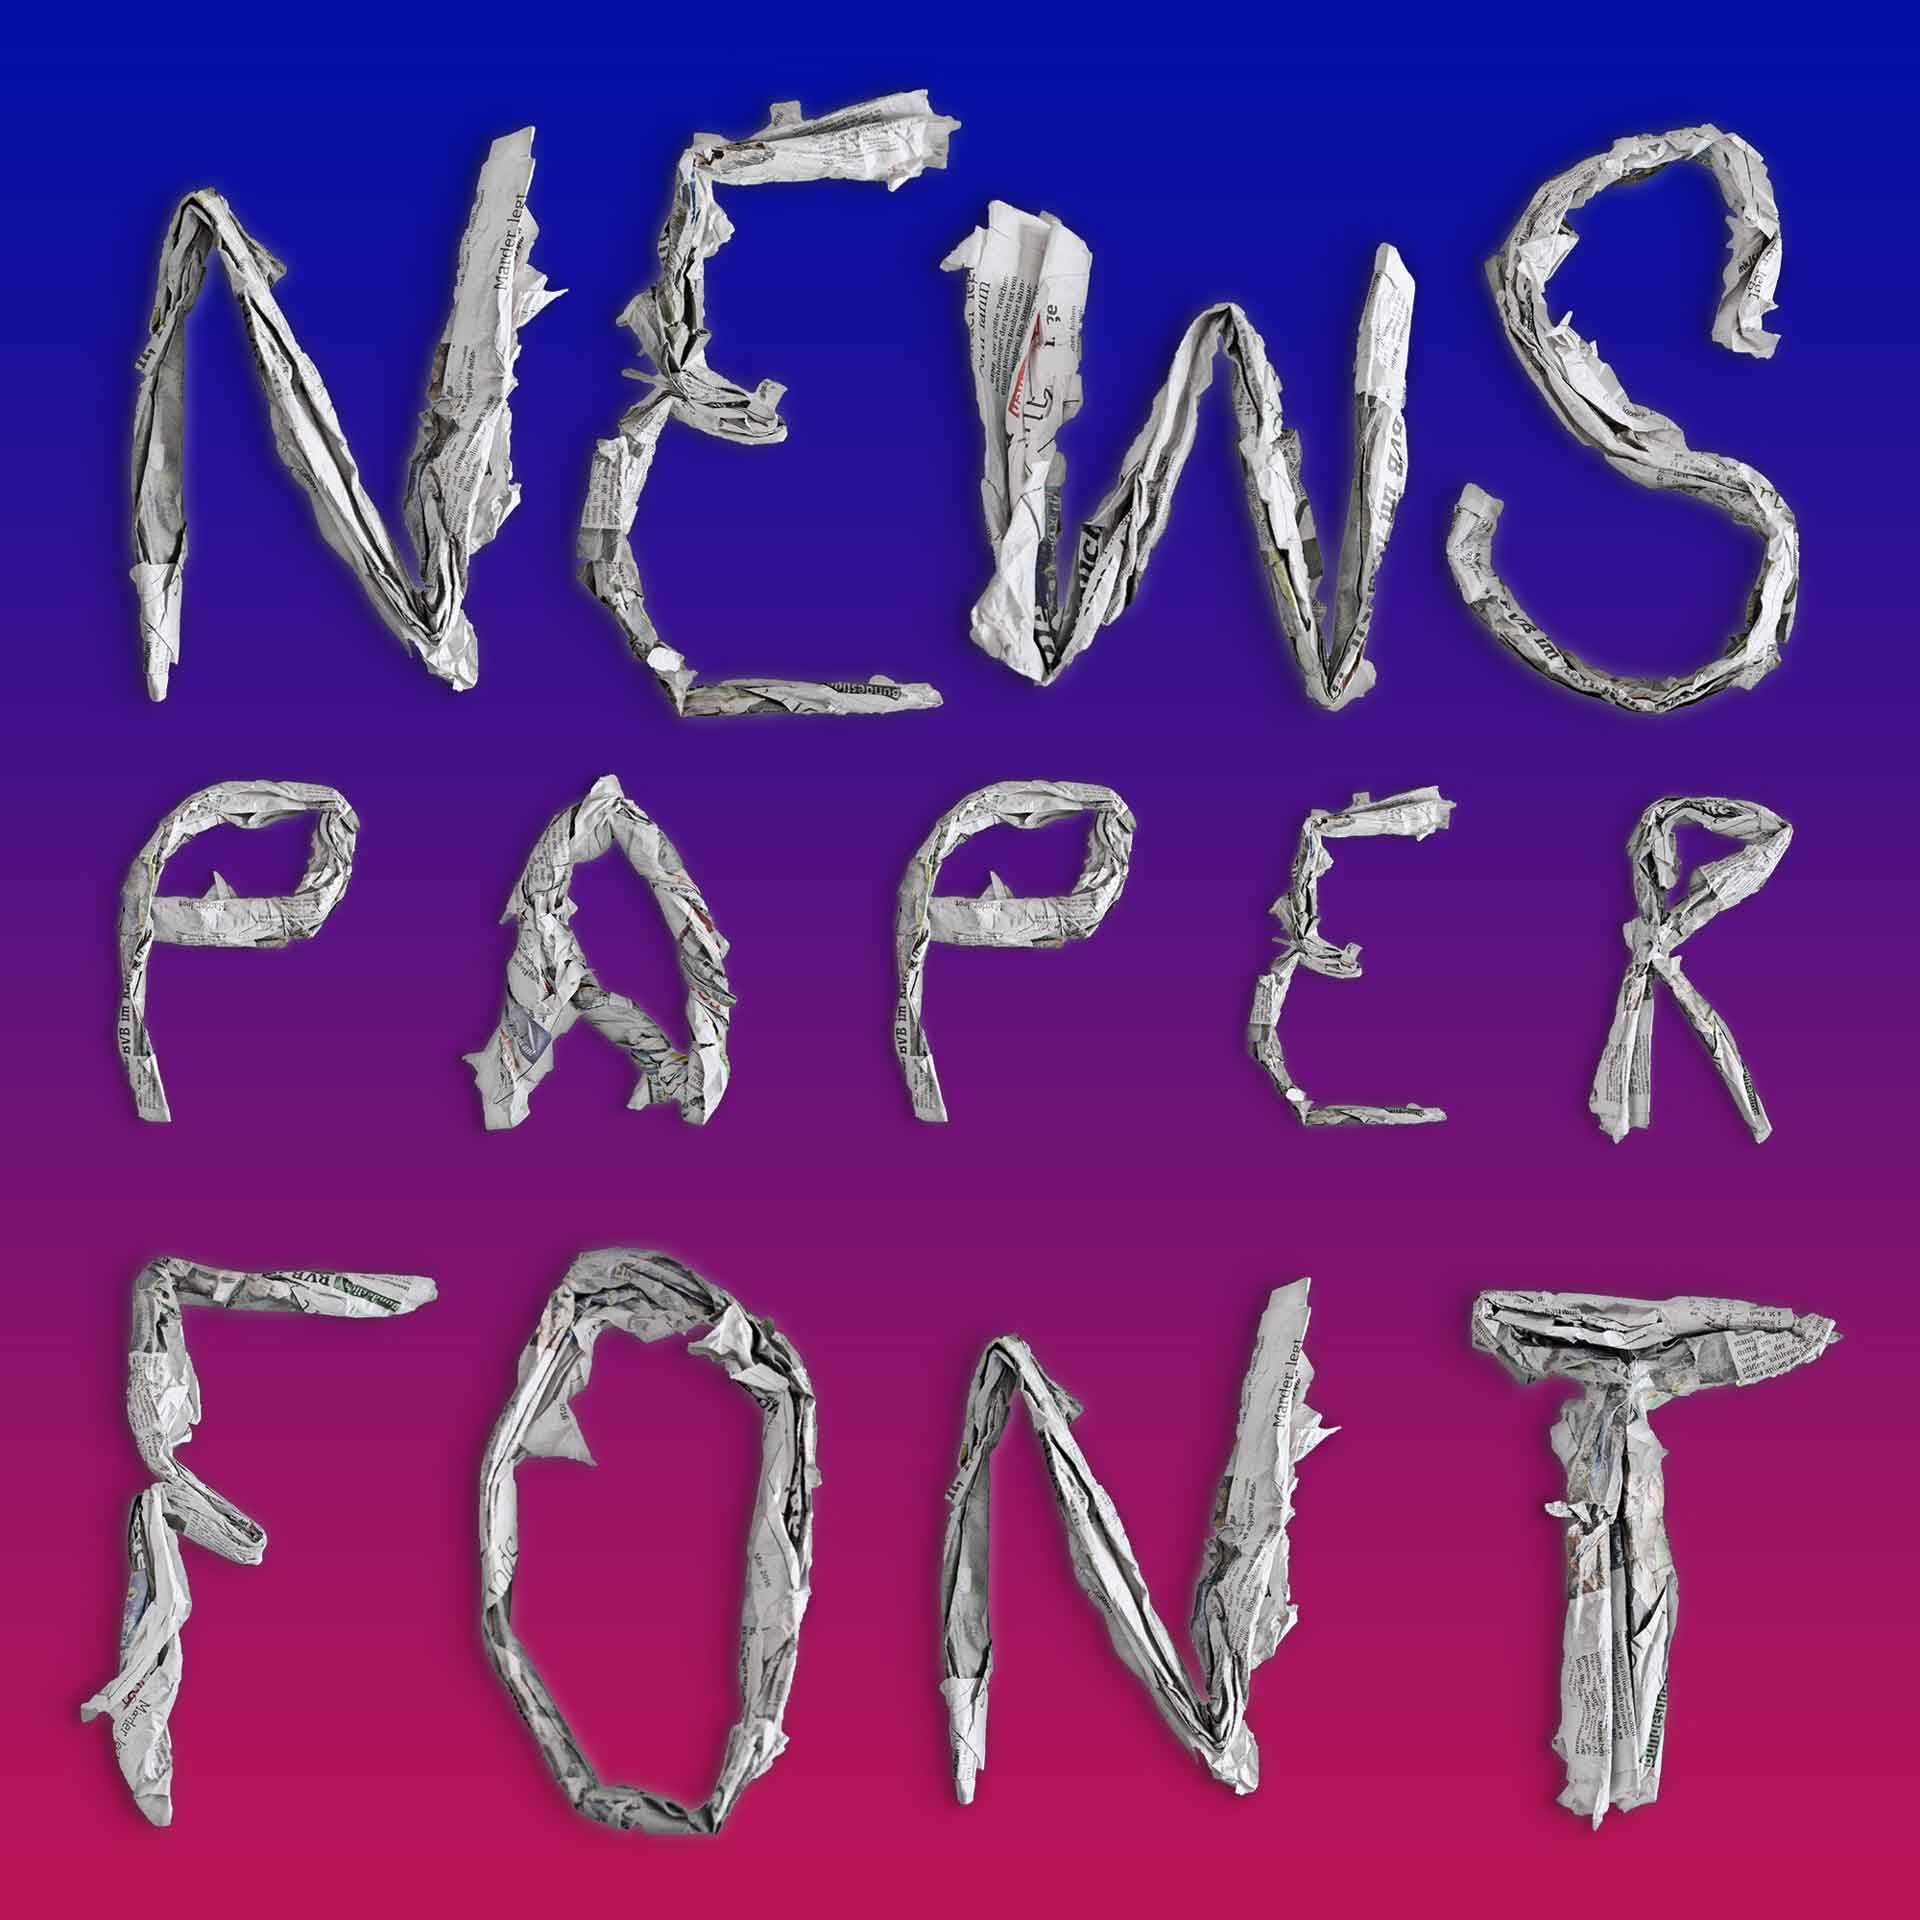 the words 'Newspaper Type' layed out in rolled newspaper